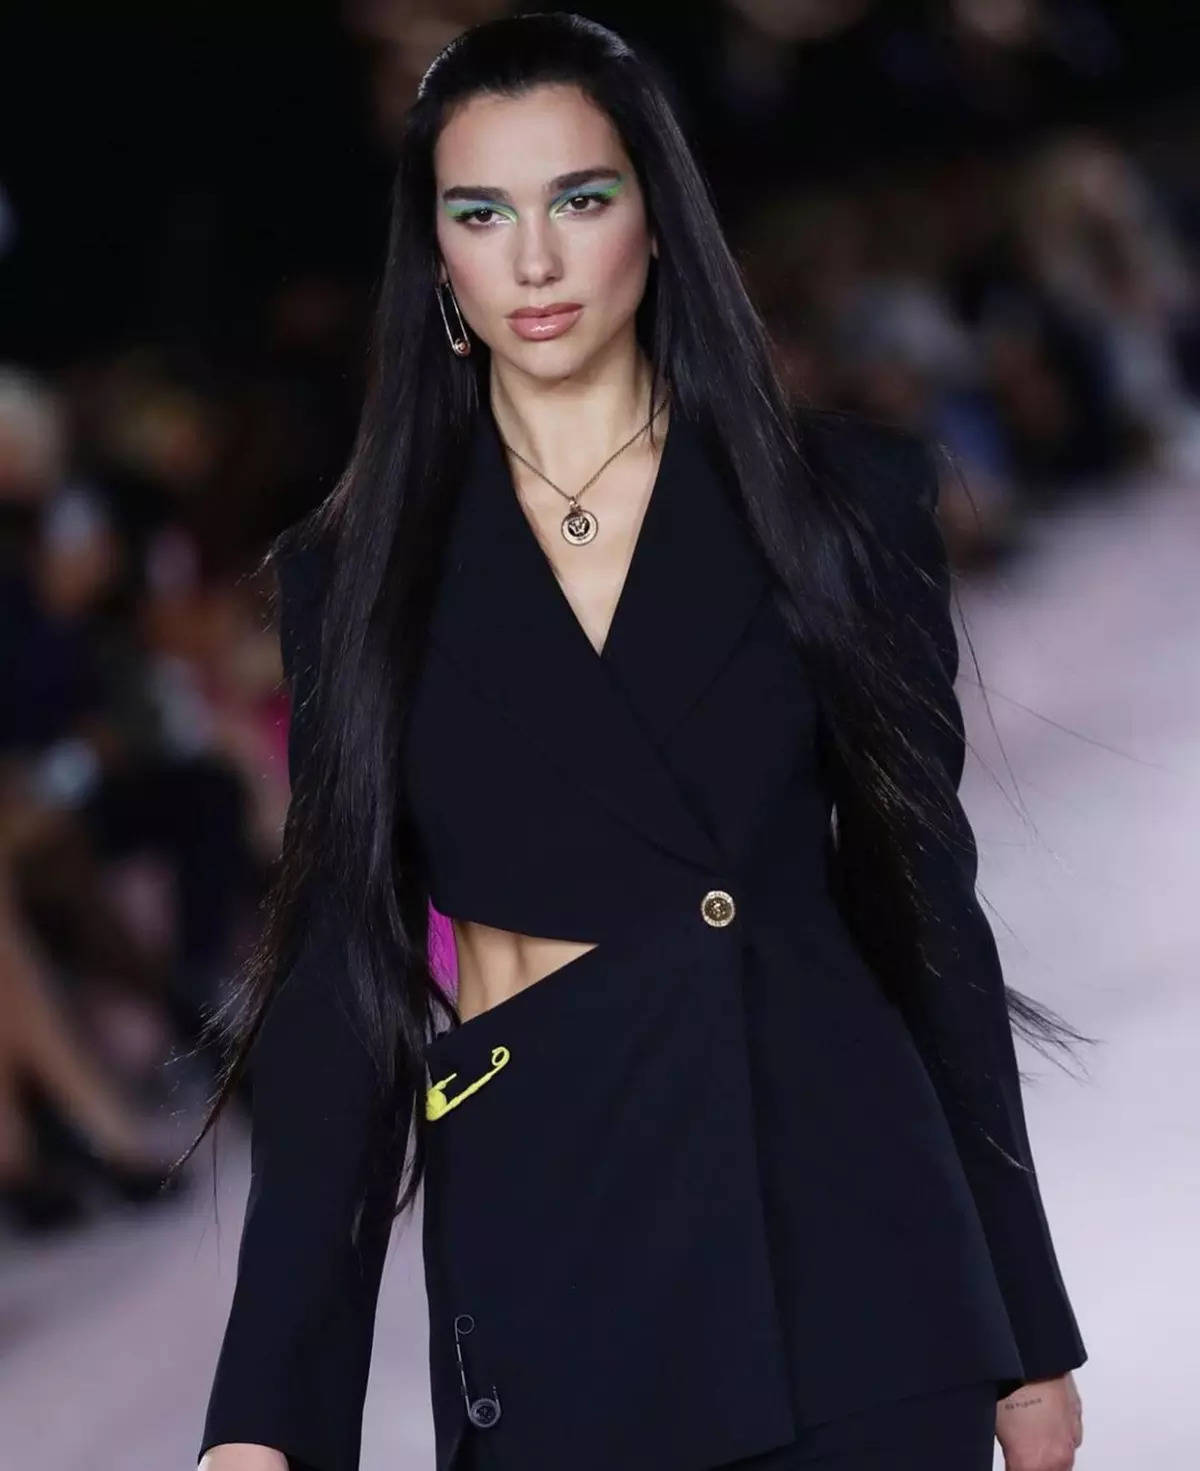 Know more about pop-singer and style icon Dua Lipa